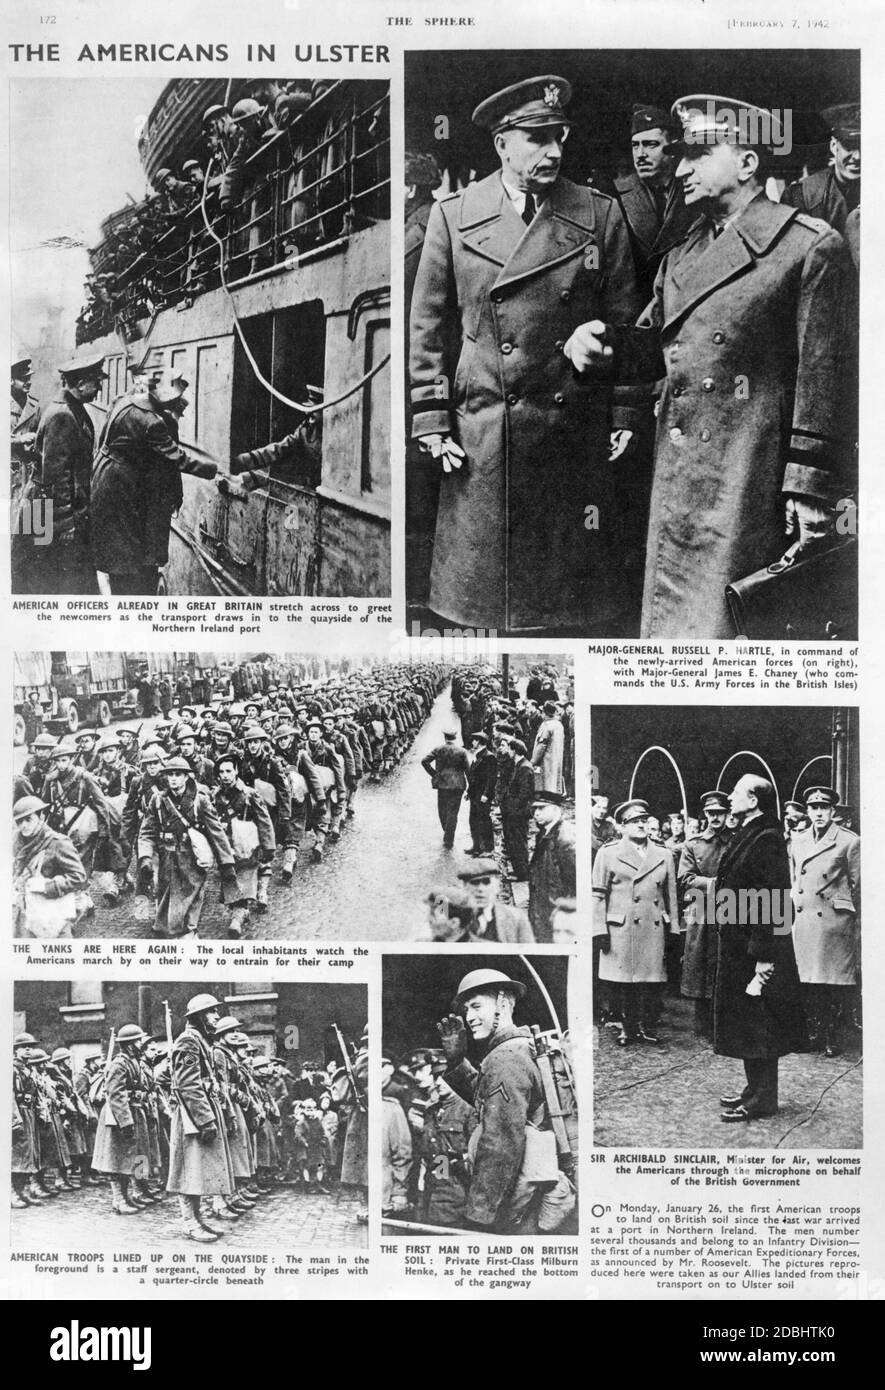 US military establishment in Great Britain. Top right: Major General James E. Chaney (left) and Major General Russell P. Hartle (right) in conversation. Below: The British Secretary of State for Aviation Archibald Sinclair welcomes the US soldiers on their arrival. The remaining photos show the arrival of US troops in Ulster, Northern Ireland. Stock Photo